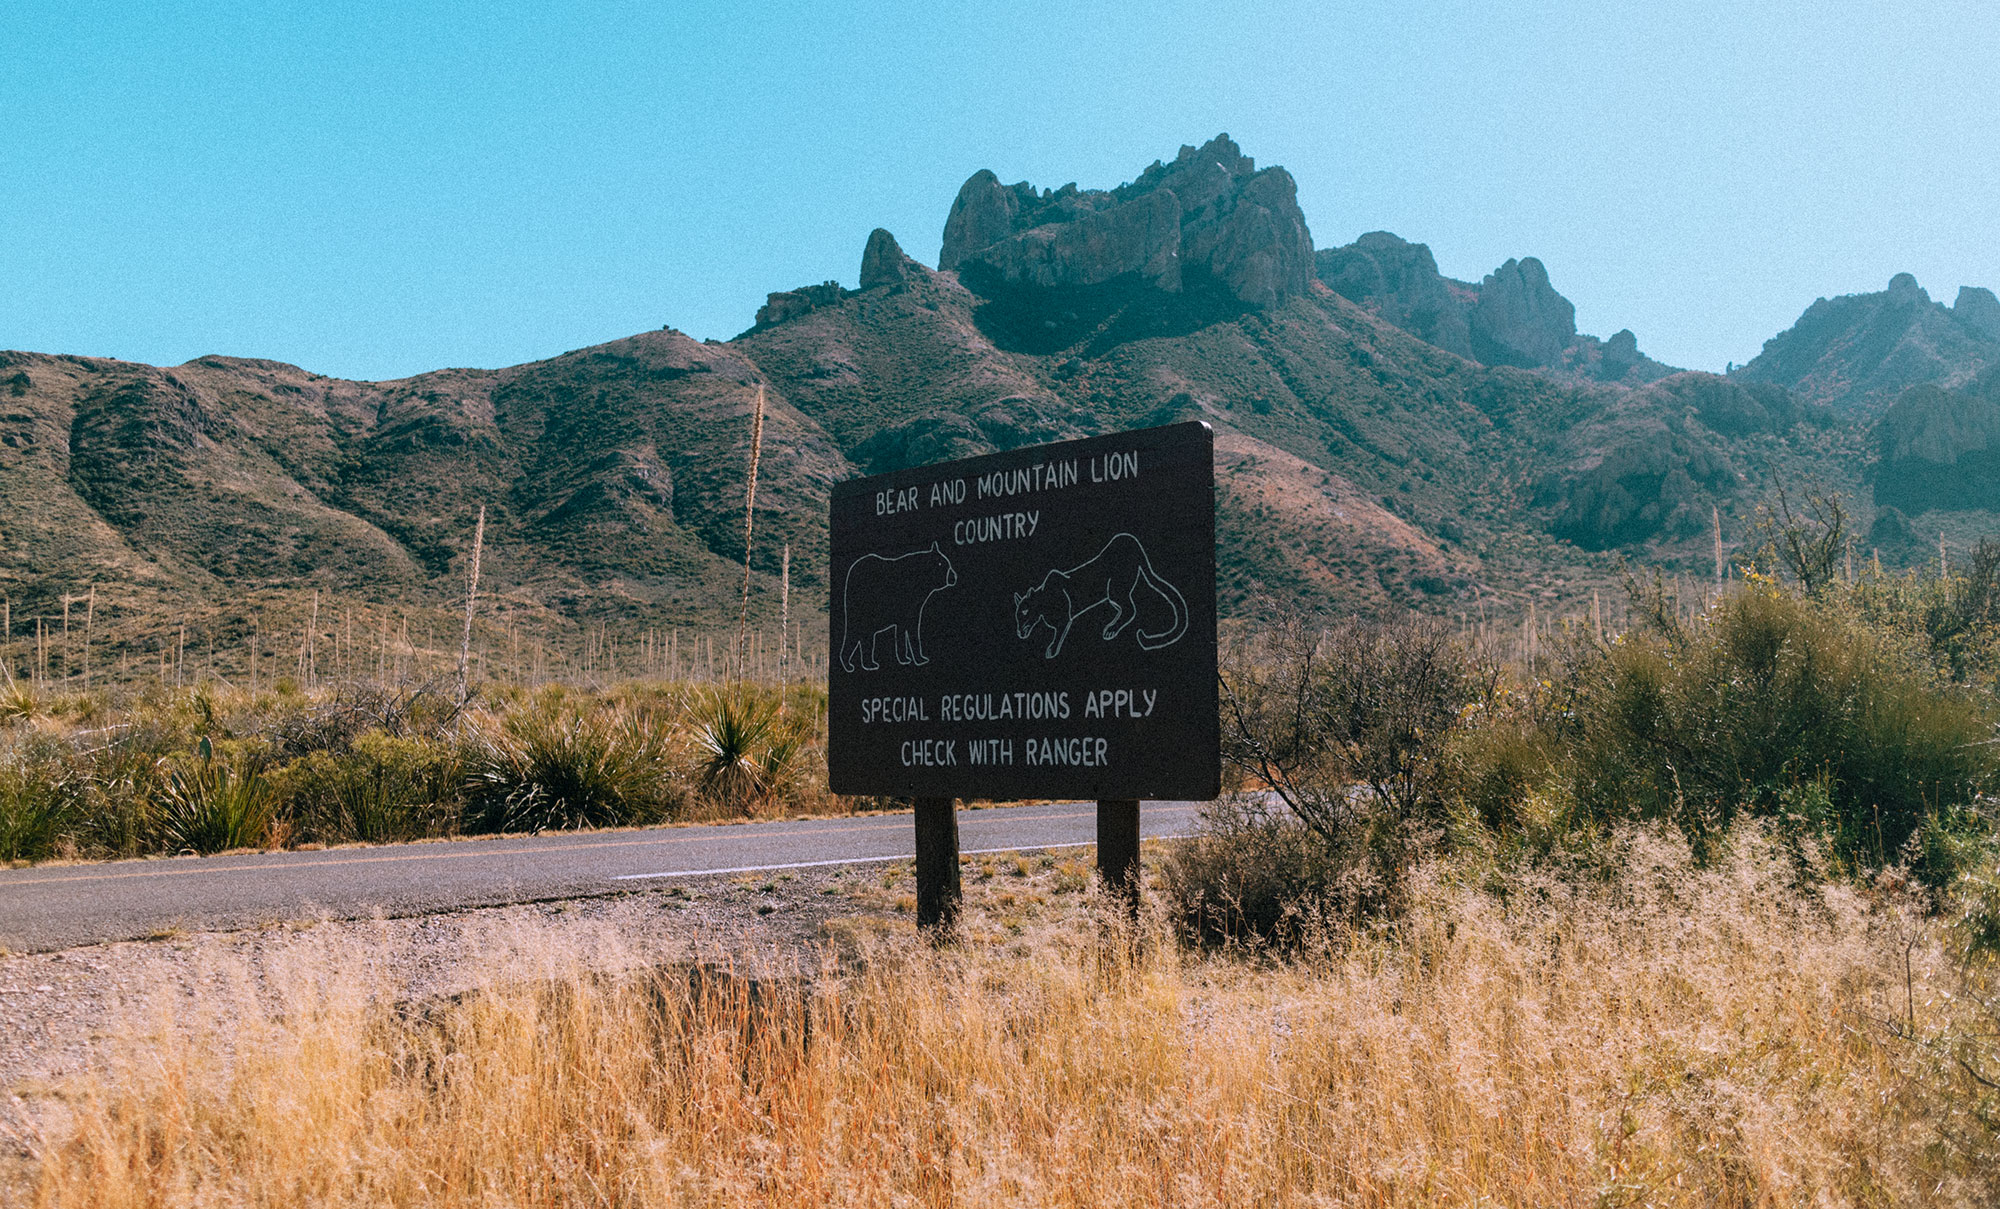 A Quick Guide To Big Bend Nationalpark – 8 Things To Do In & Around Big Bend / Texas Traveel Guide by iHeartAlice.com – Travel, Lifestyle, Food & Fashionblog by Alice M. Huynh / USA Roadtrip